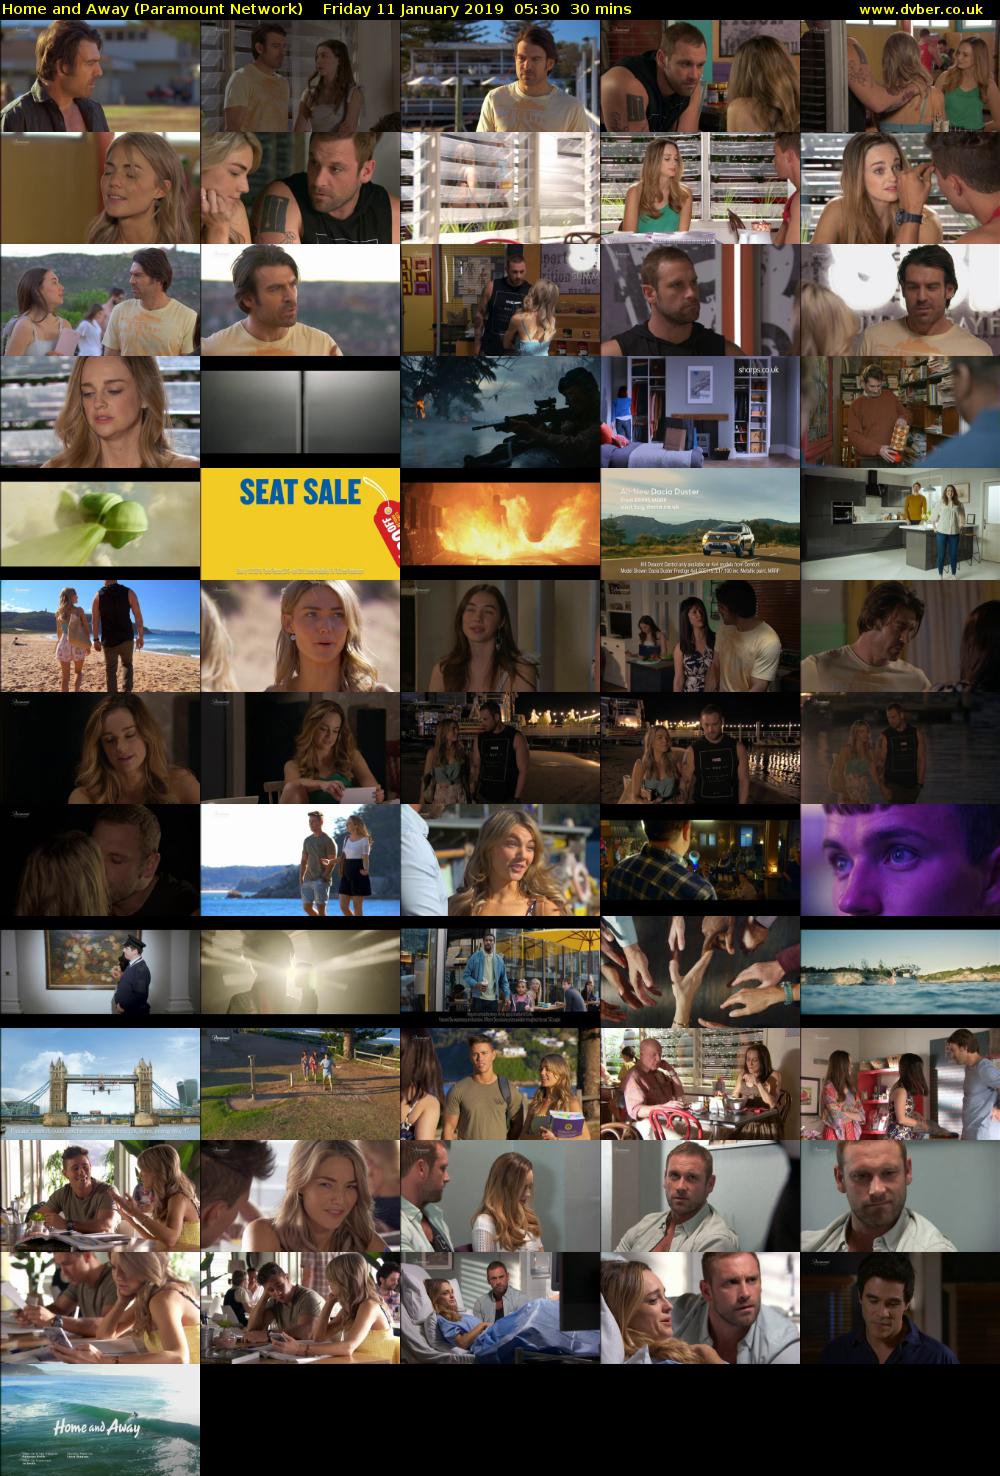 Home and Away (Paramount Network) Friday 11 January 2019 05:30 - 06:00